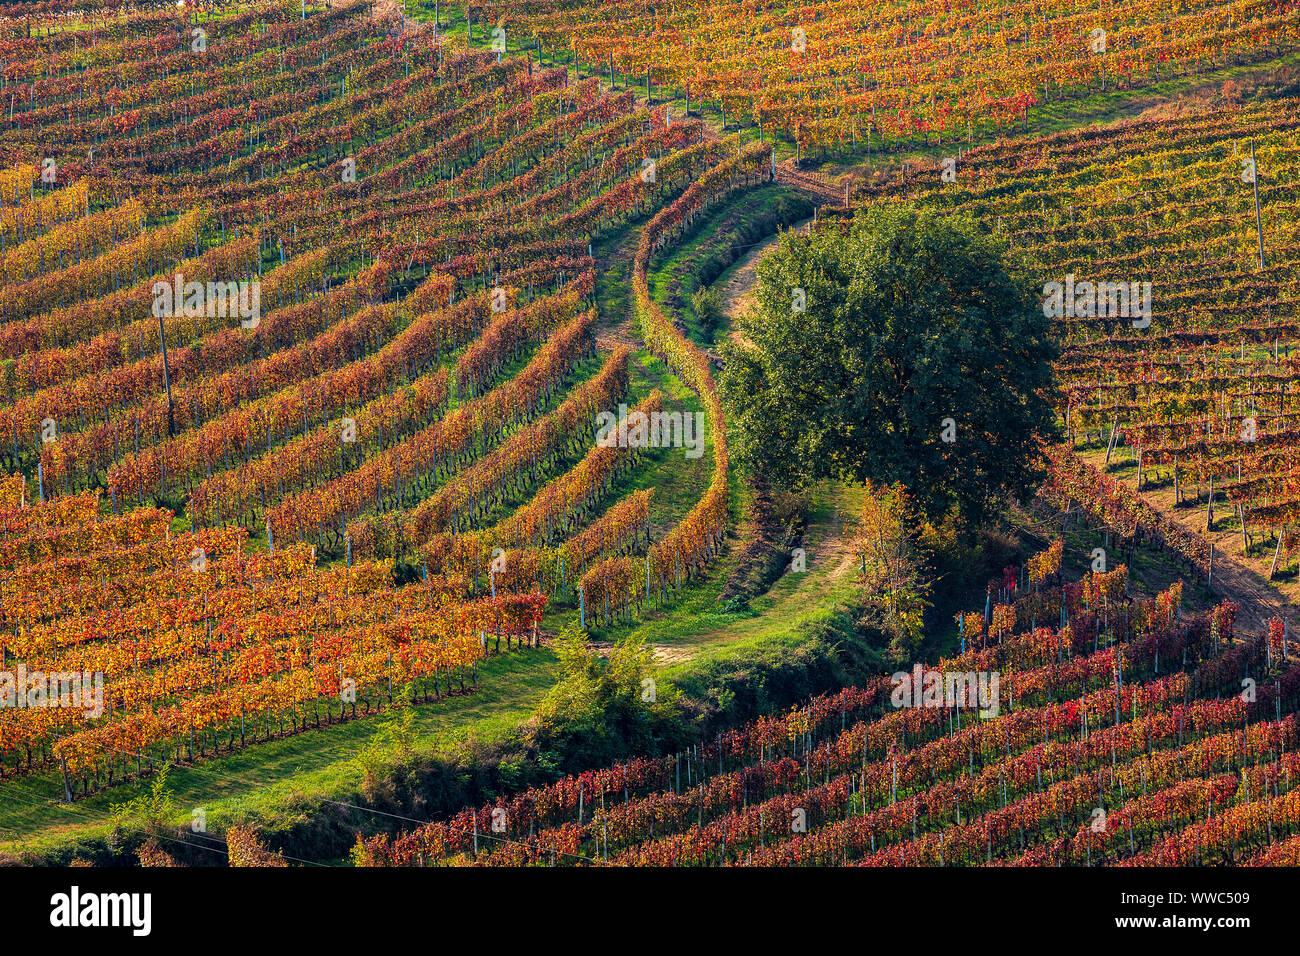 Narrow rural road among colorful autumnal vineyards on the hills of Piedmont, Northern Italy. Stock Photo